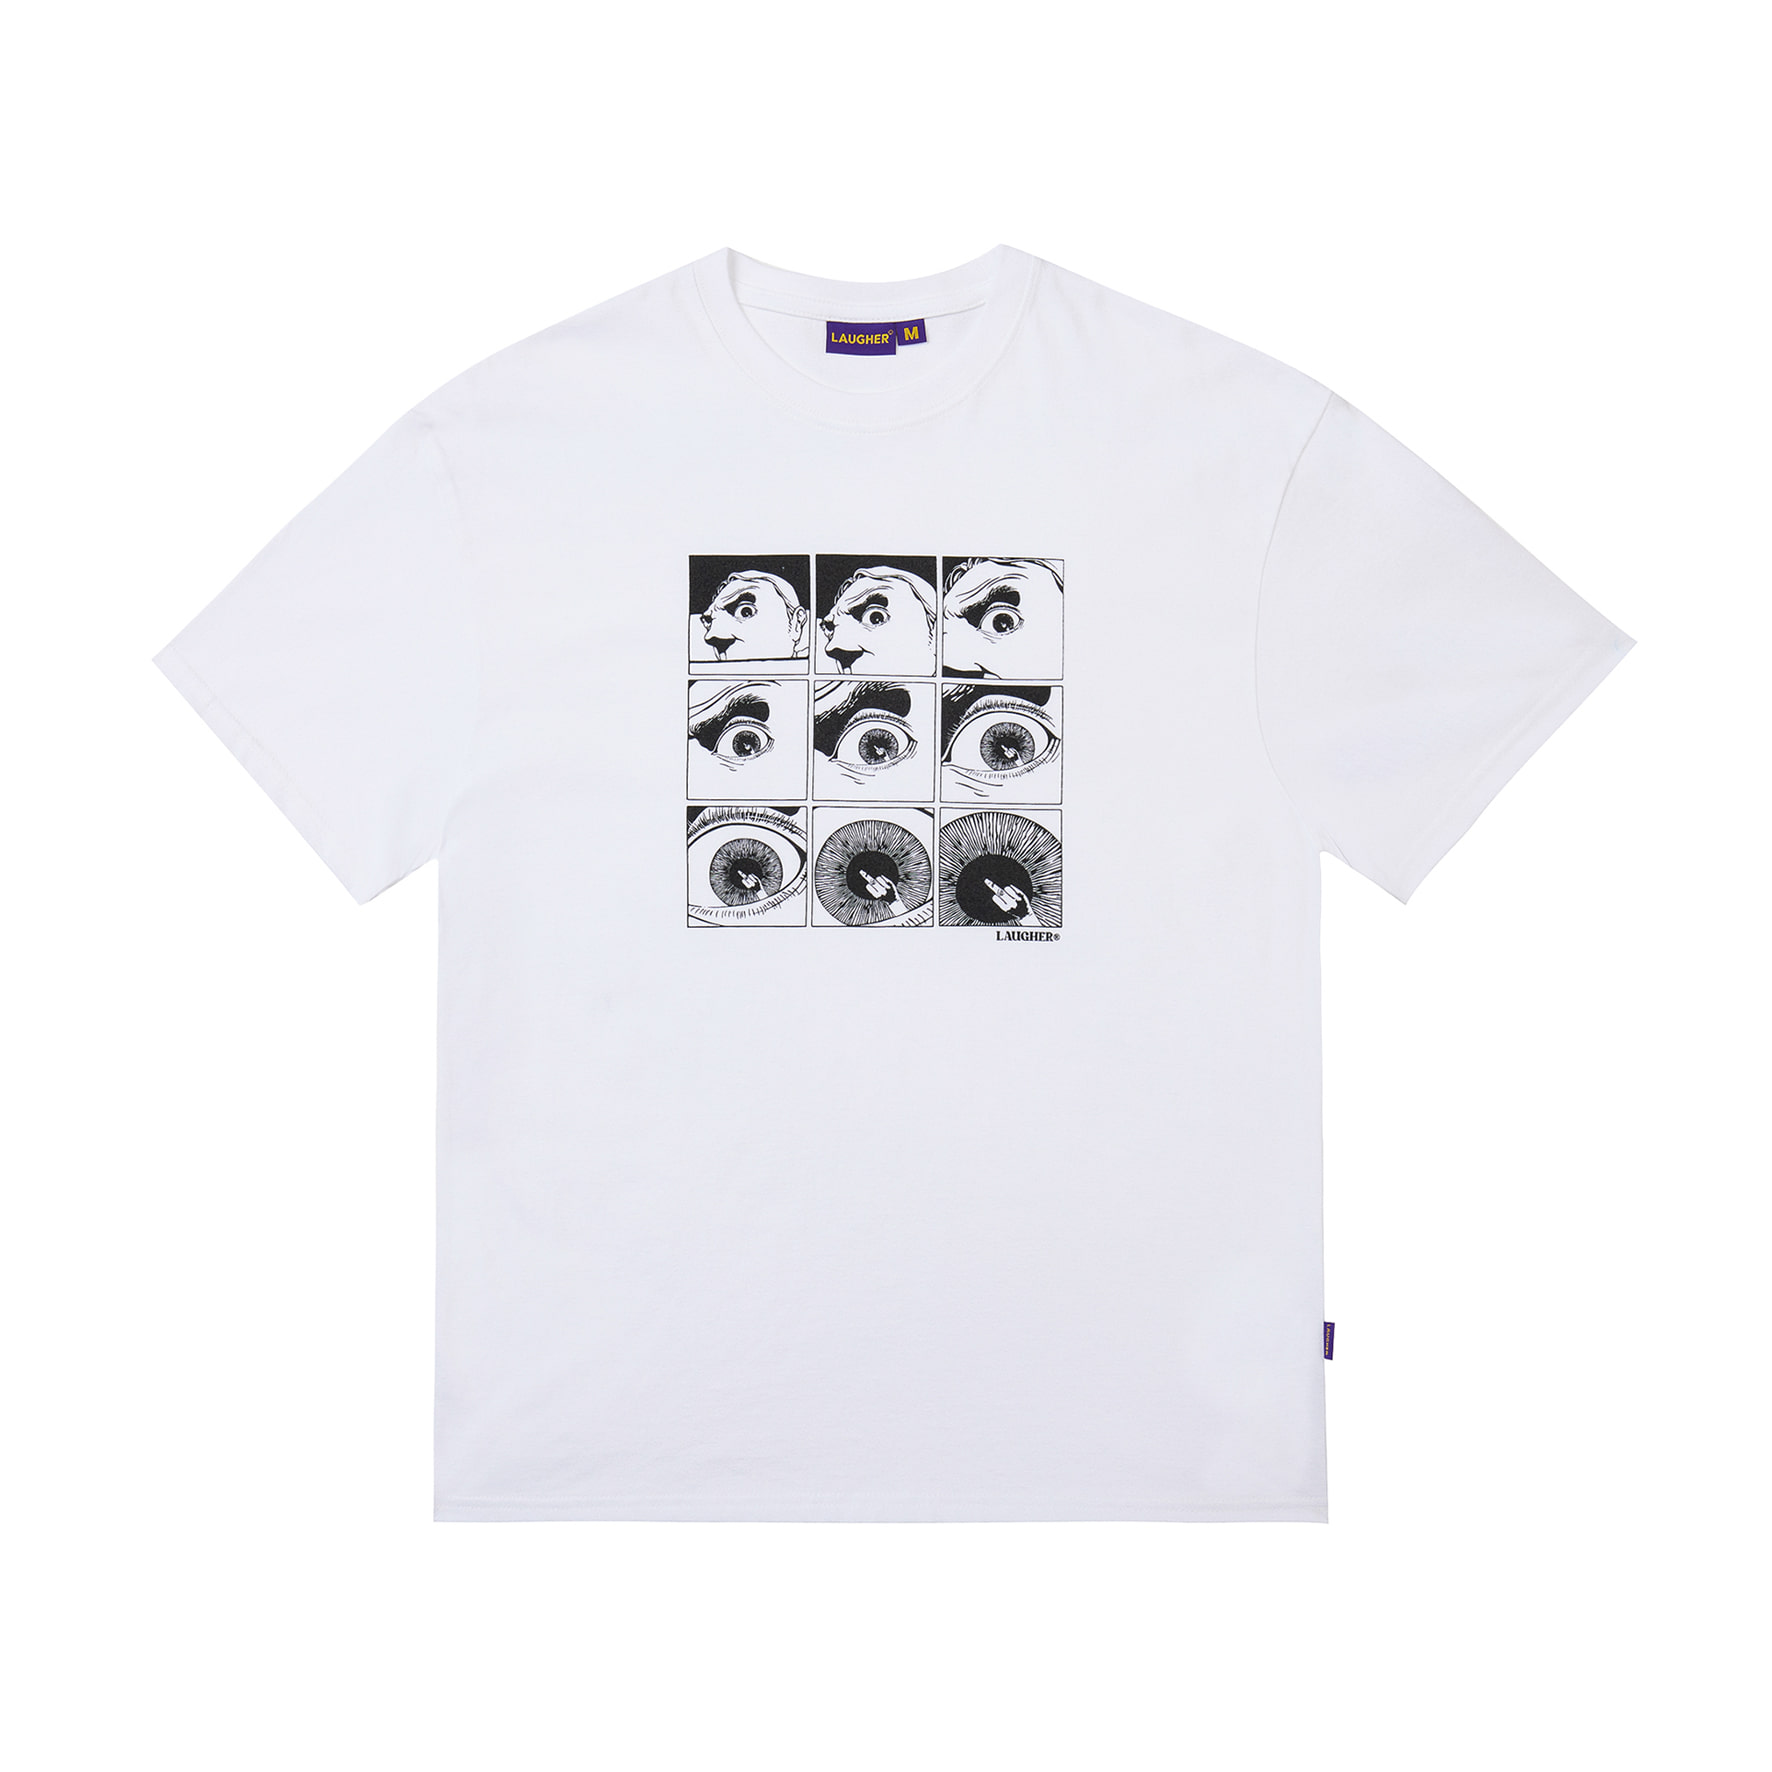 OPEN YOUR EYES T-SHIRT - WHITE